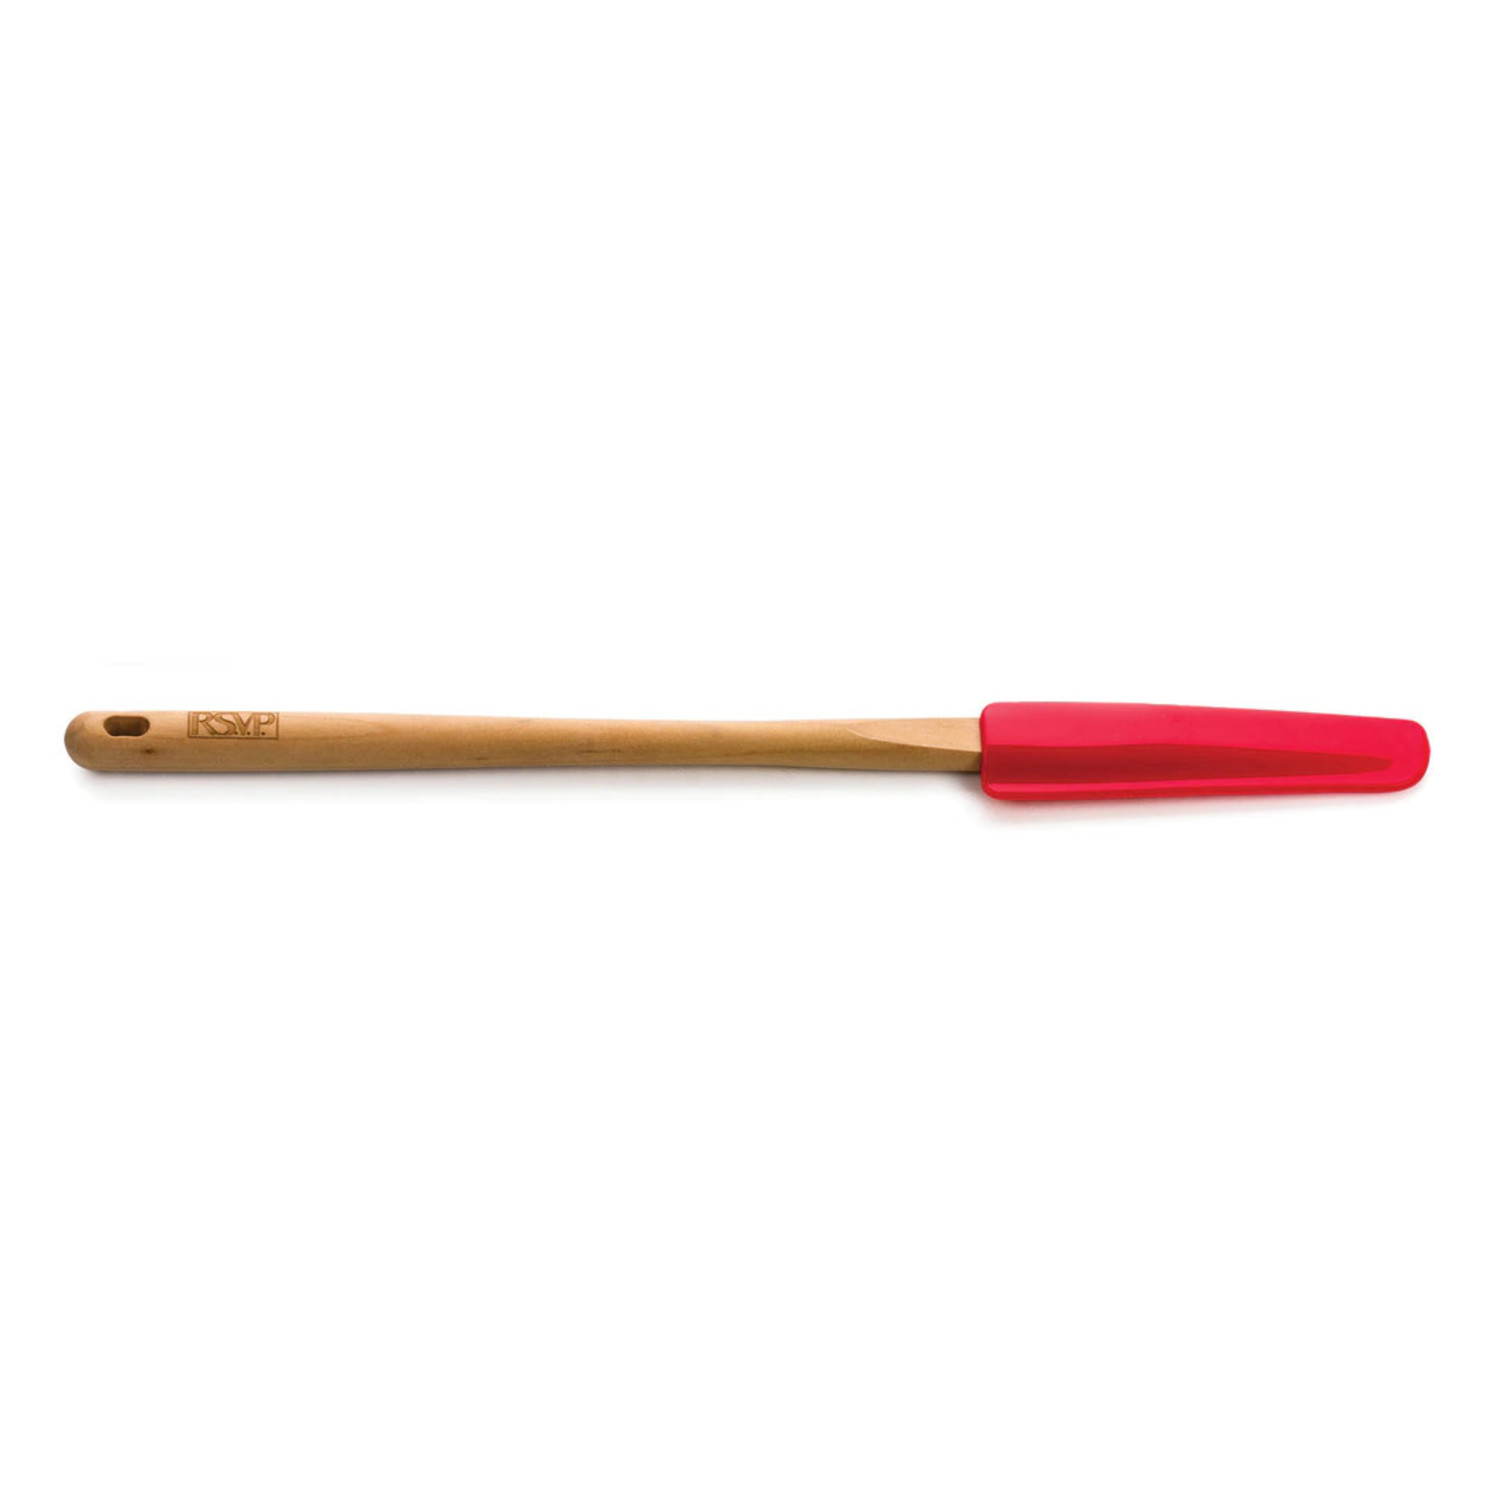 skinny spatula, red - Whisk